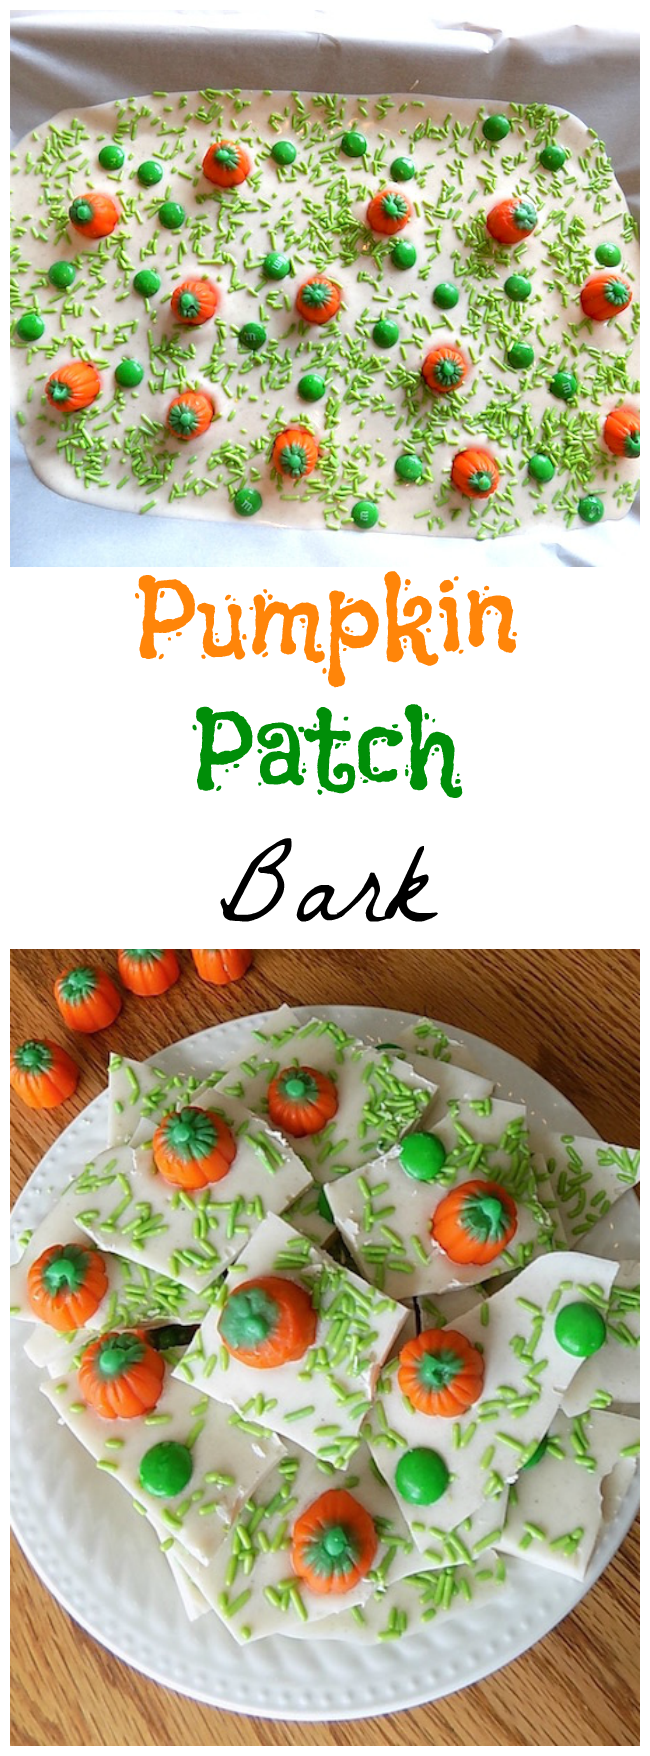 Fall is here & it's Pumpkin time! This Pumpkin Patch Bark recipe is perfect for any fall gathering or as a fun recipe for kids to make.